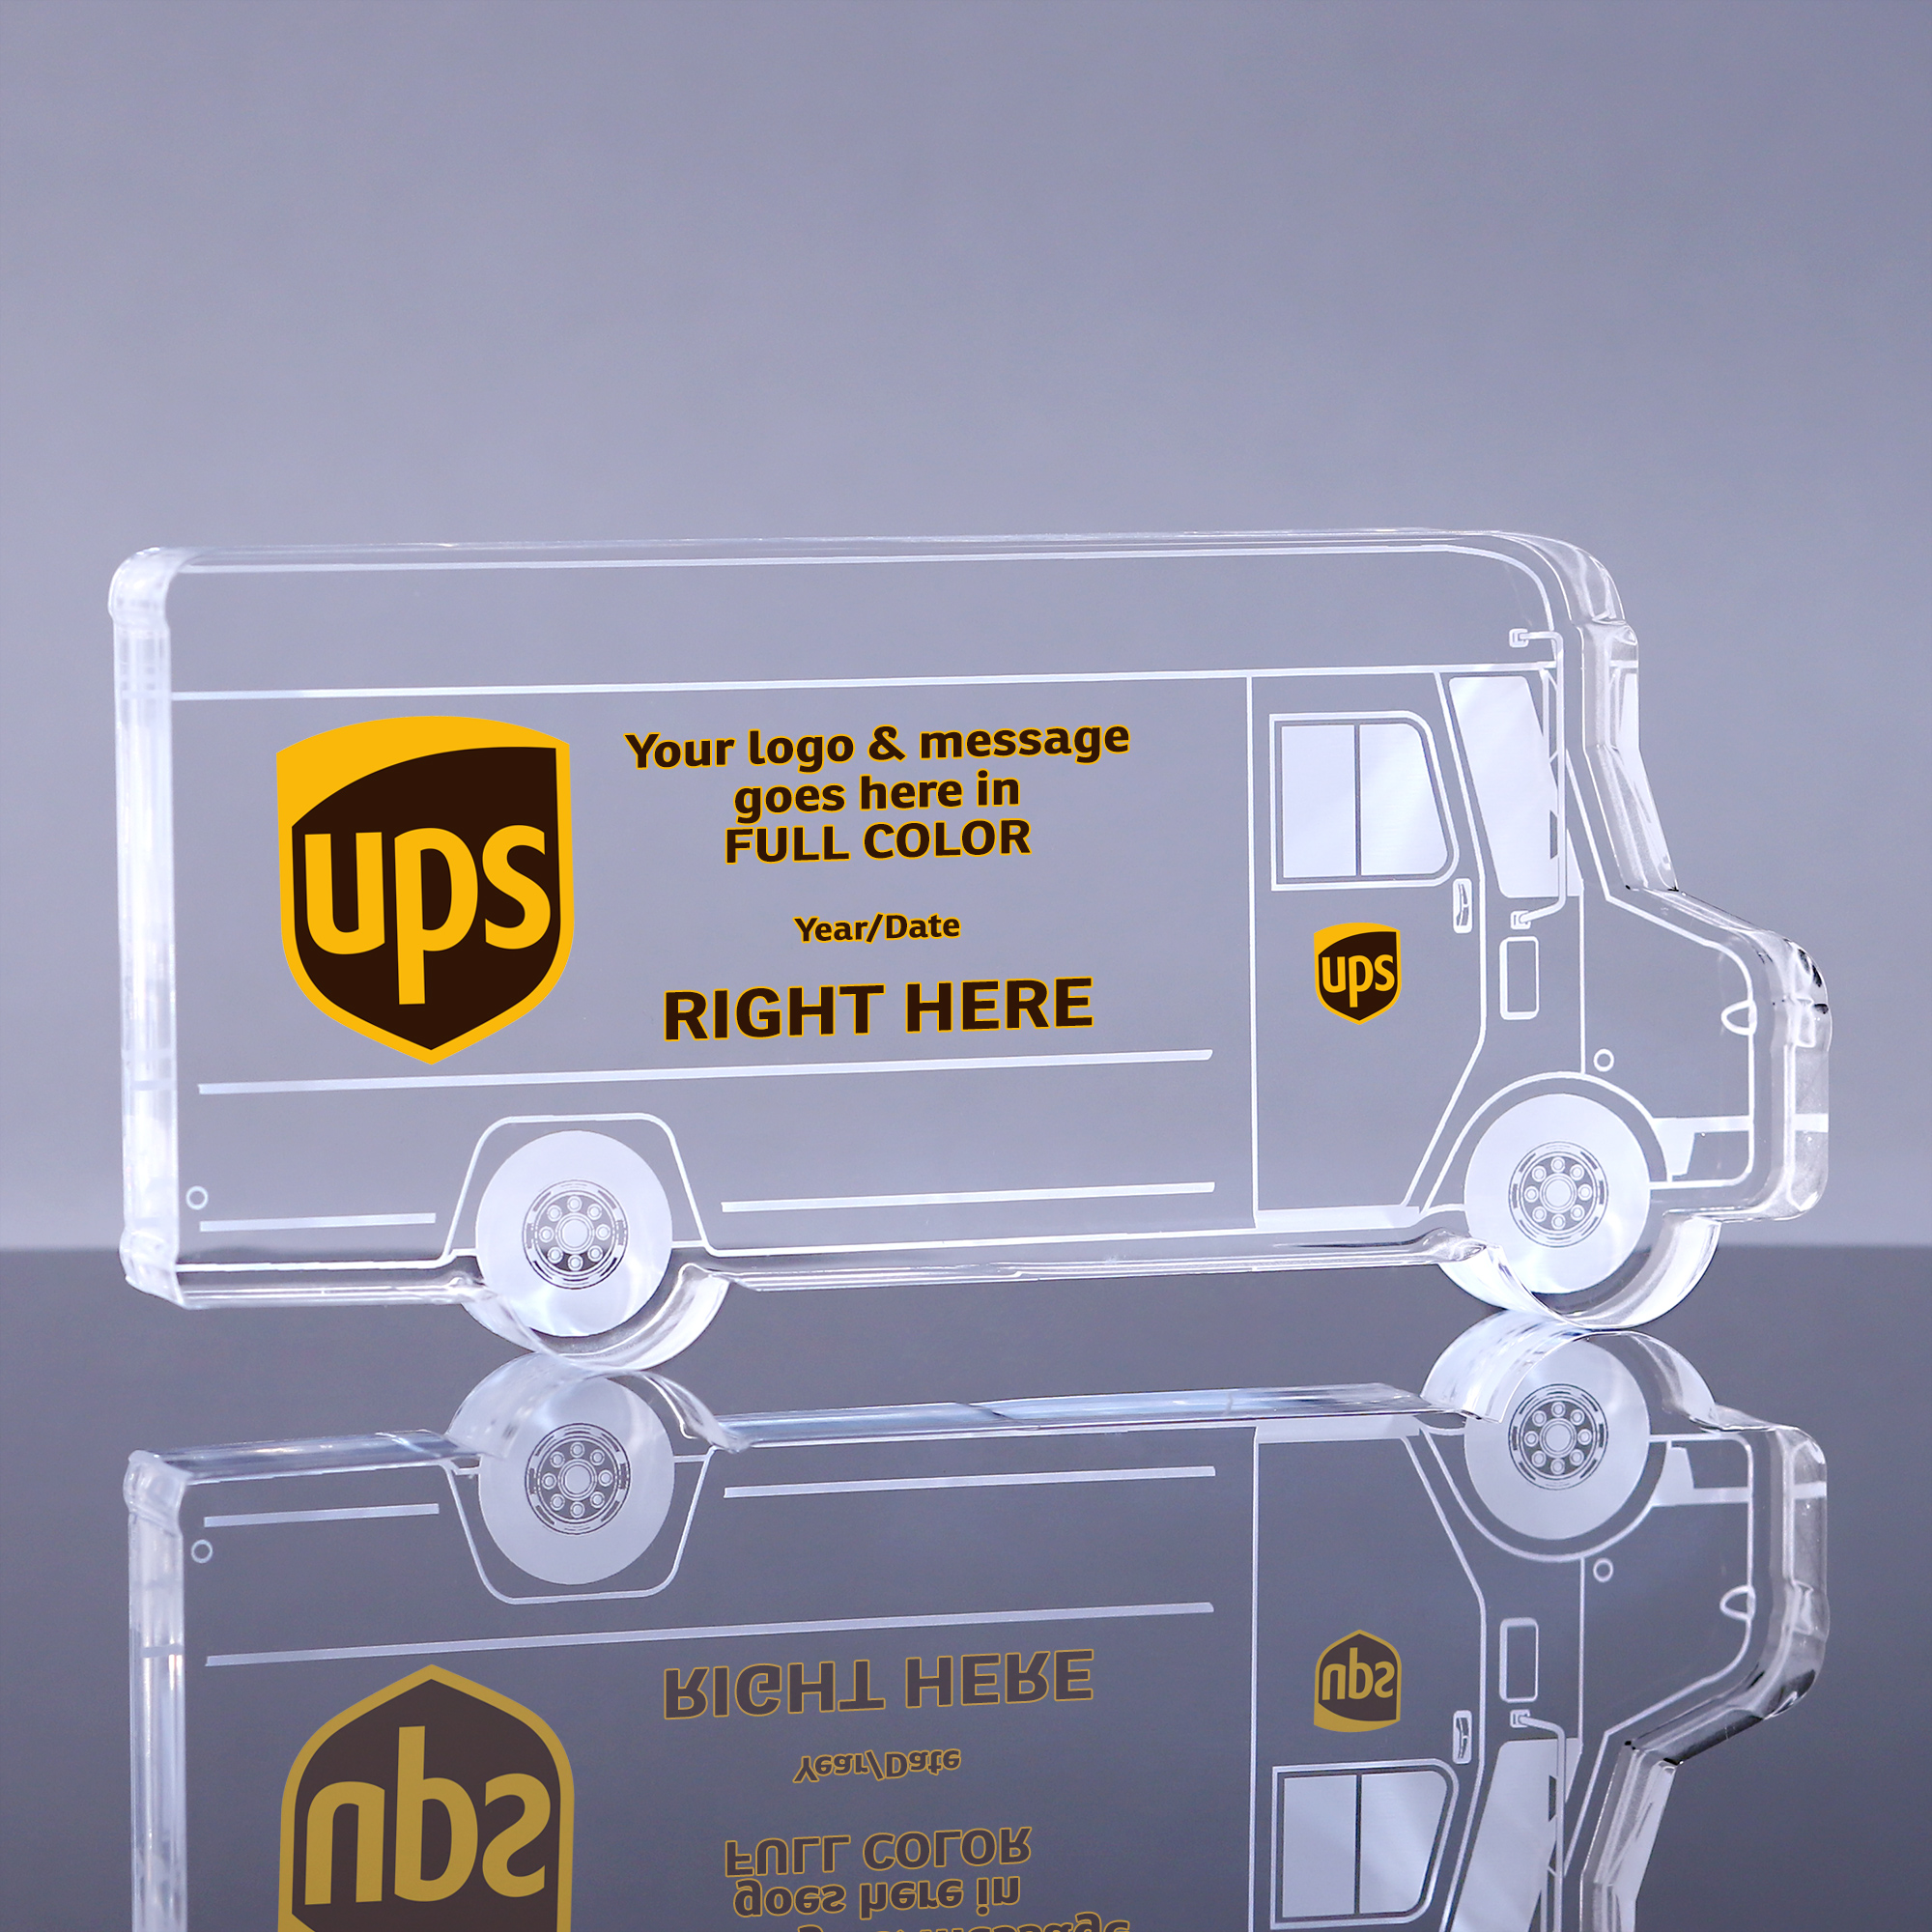 1 inch Thick Delivery Truck Acrylic Award - 7.5 inch Color